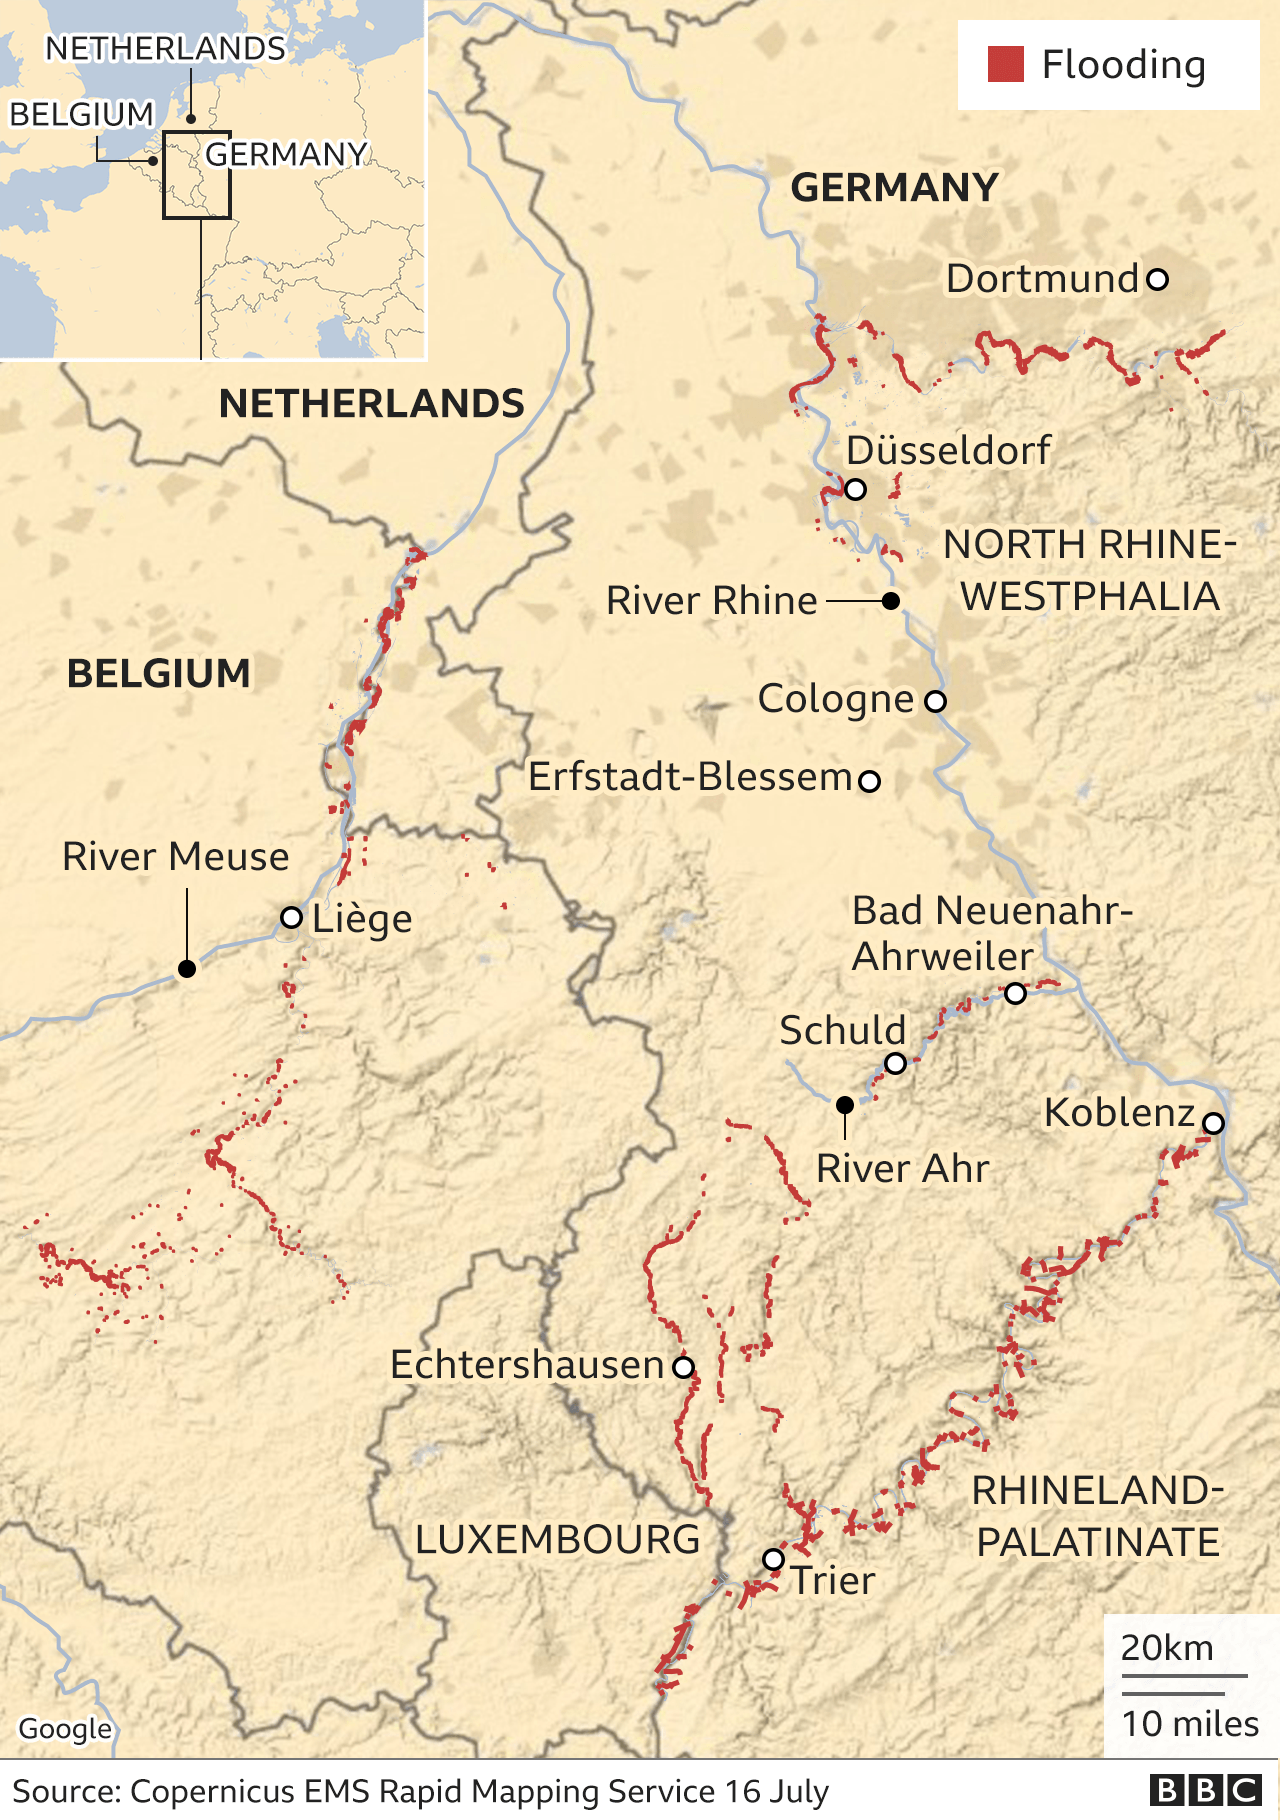 Map showing flood areas in Western Europe